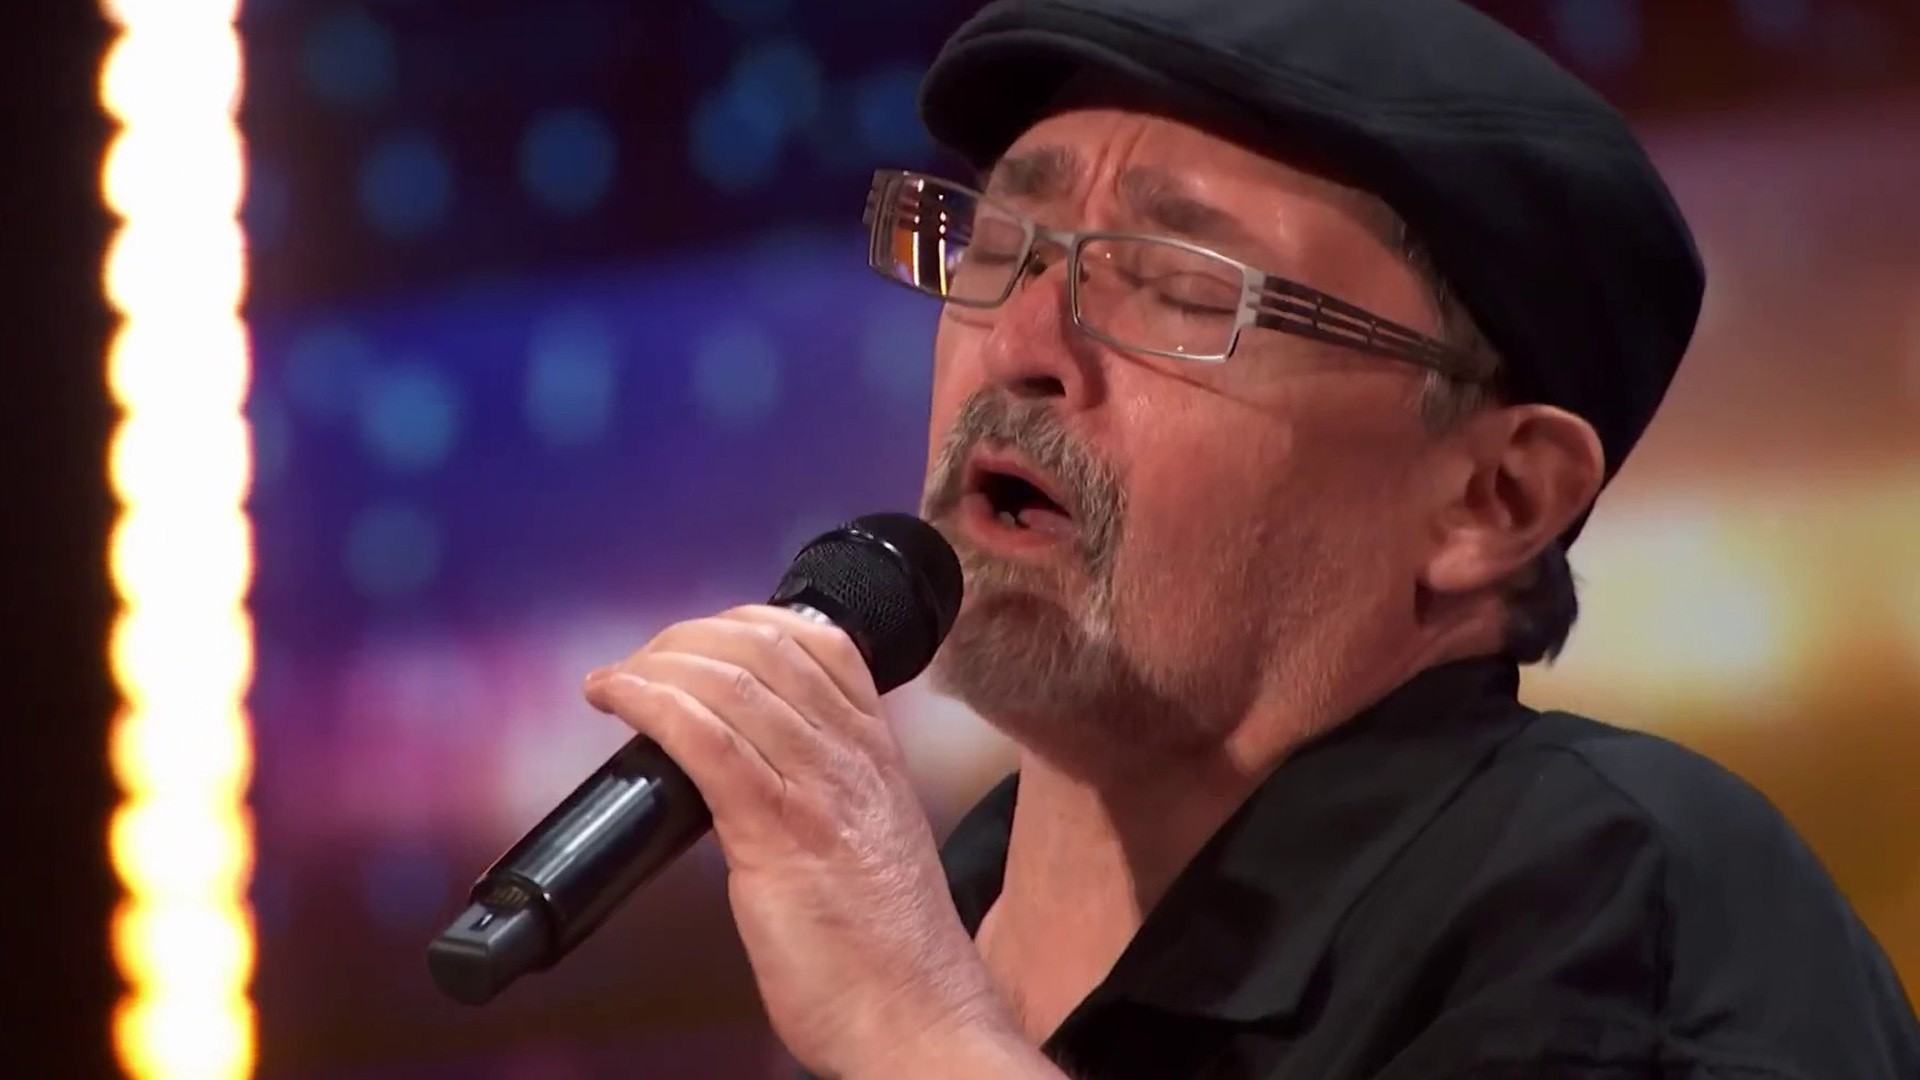 55-year-old janitor wows 'AGT' judges with 'Don't Stop Believin'